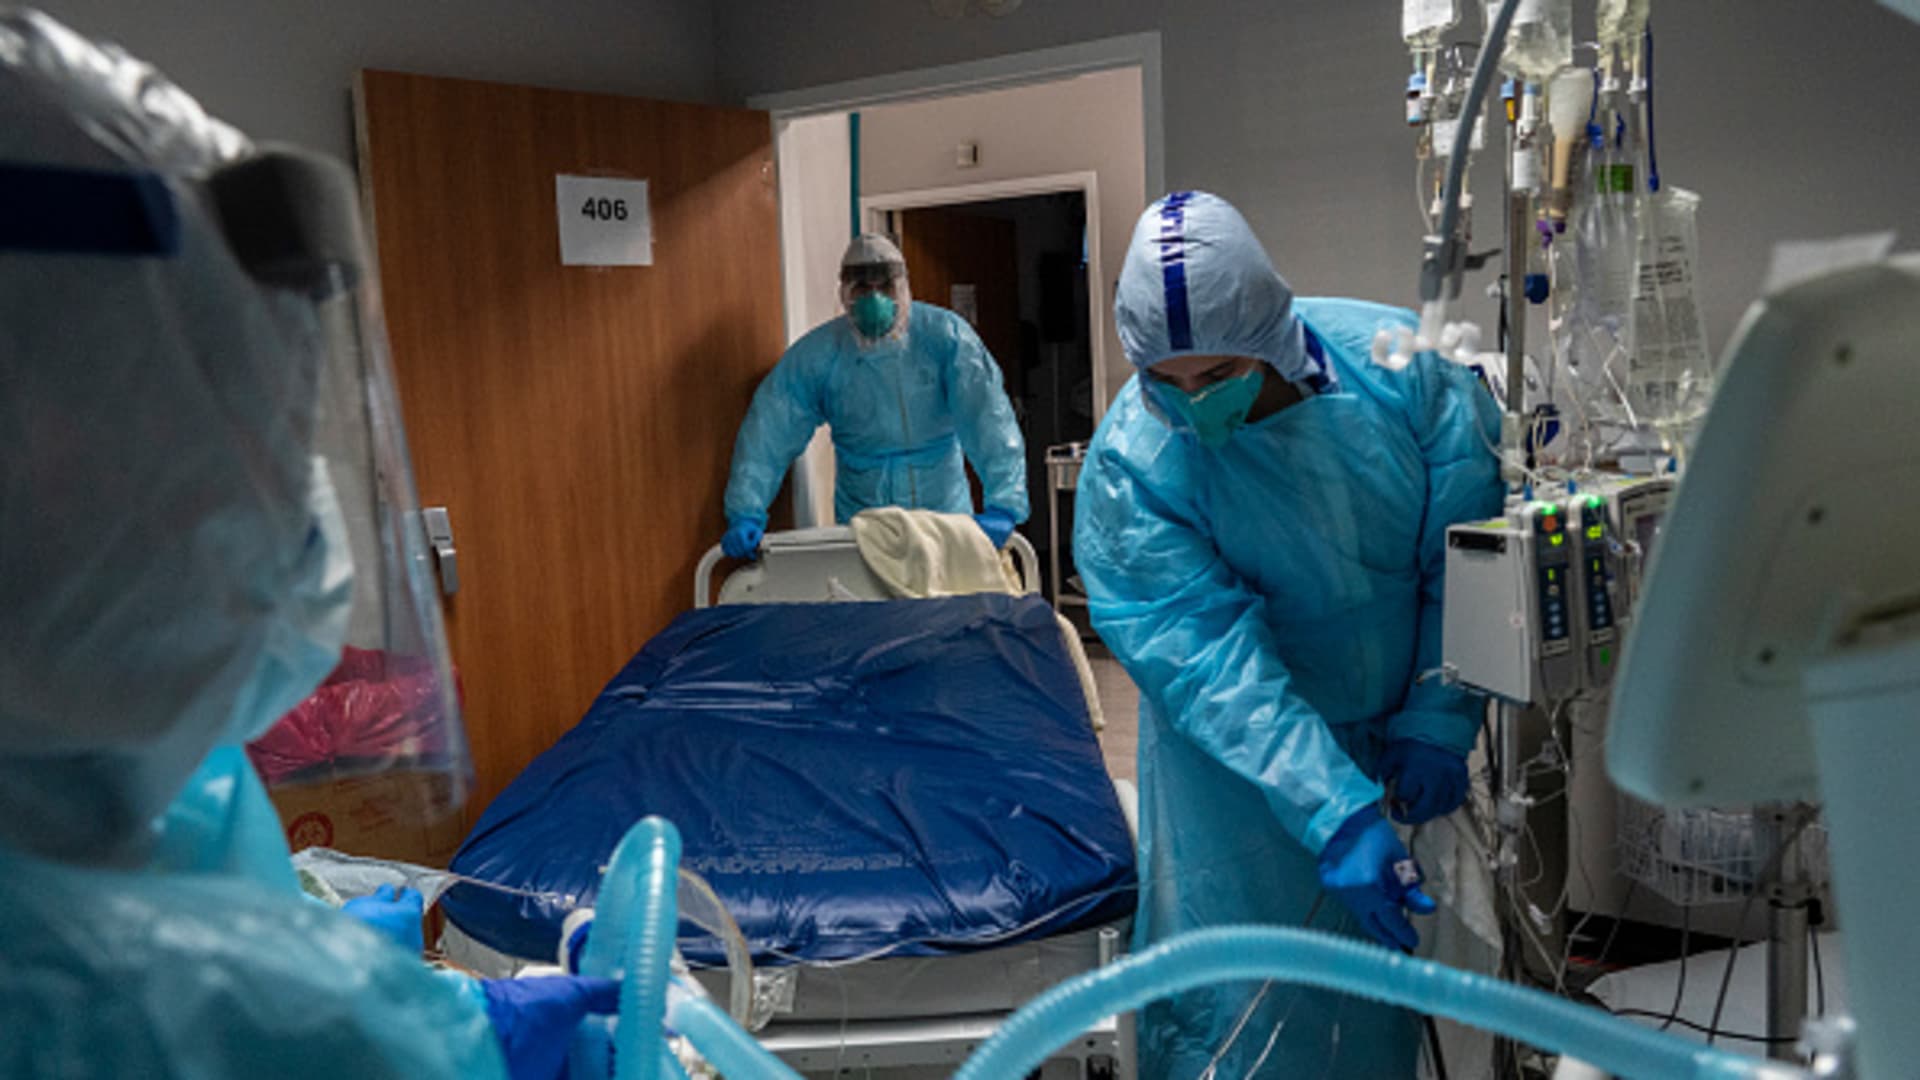 Medical staff members sort lines and pipes connected to a patient in the COVID-19 intensive care unit (ICU) at the United Memorial Medical Center on November 19, 2020 in Houston, Texas.